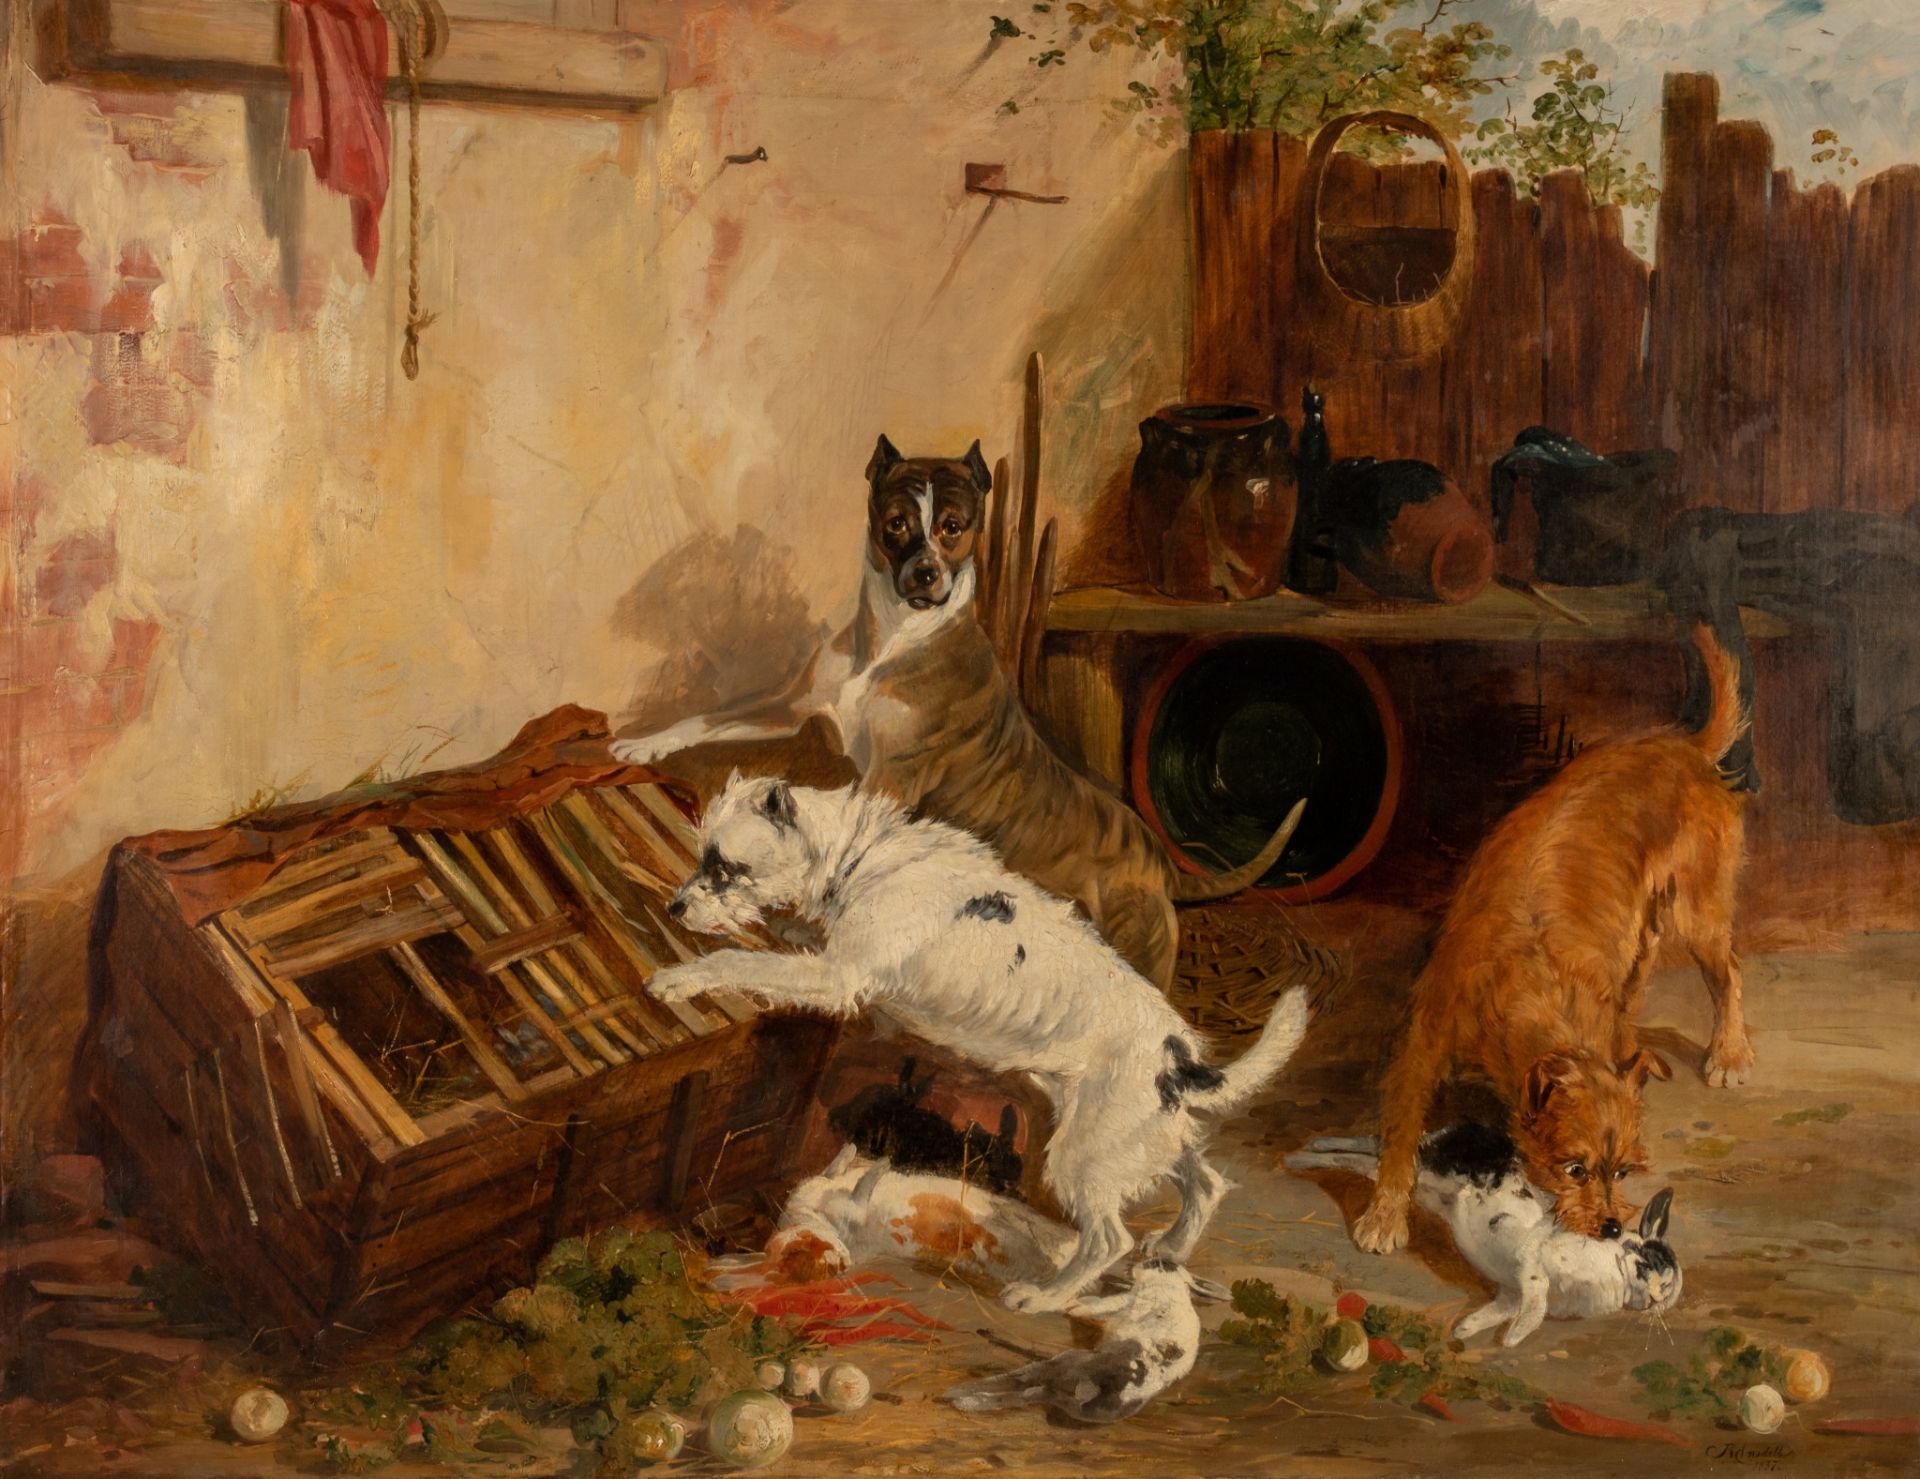 Richard Ansdell (1815-1885), dogs looting the rabbit hutch, 1837, oil on canvas, 80 x 108 cm